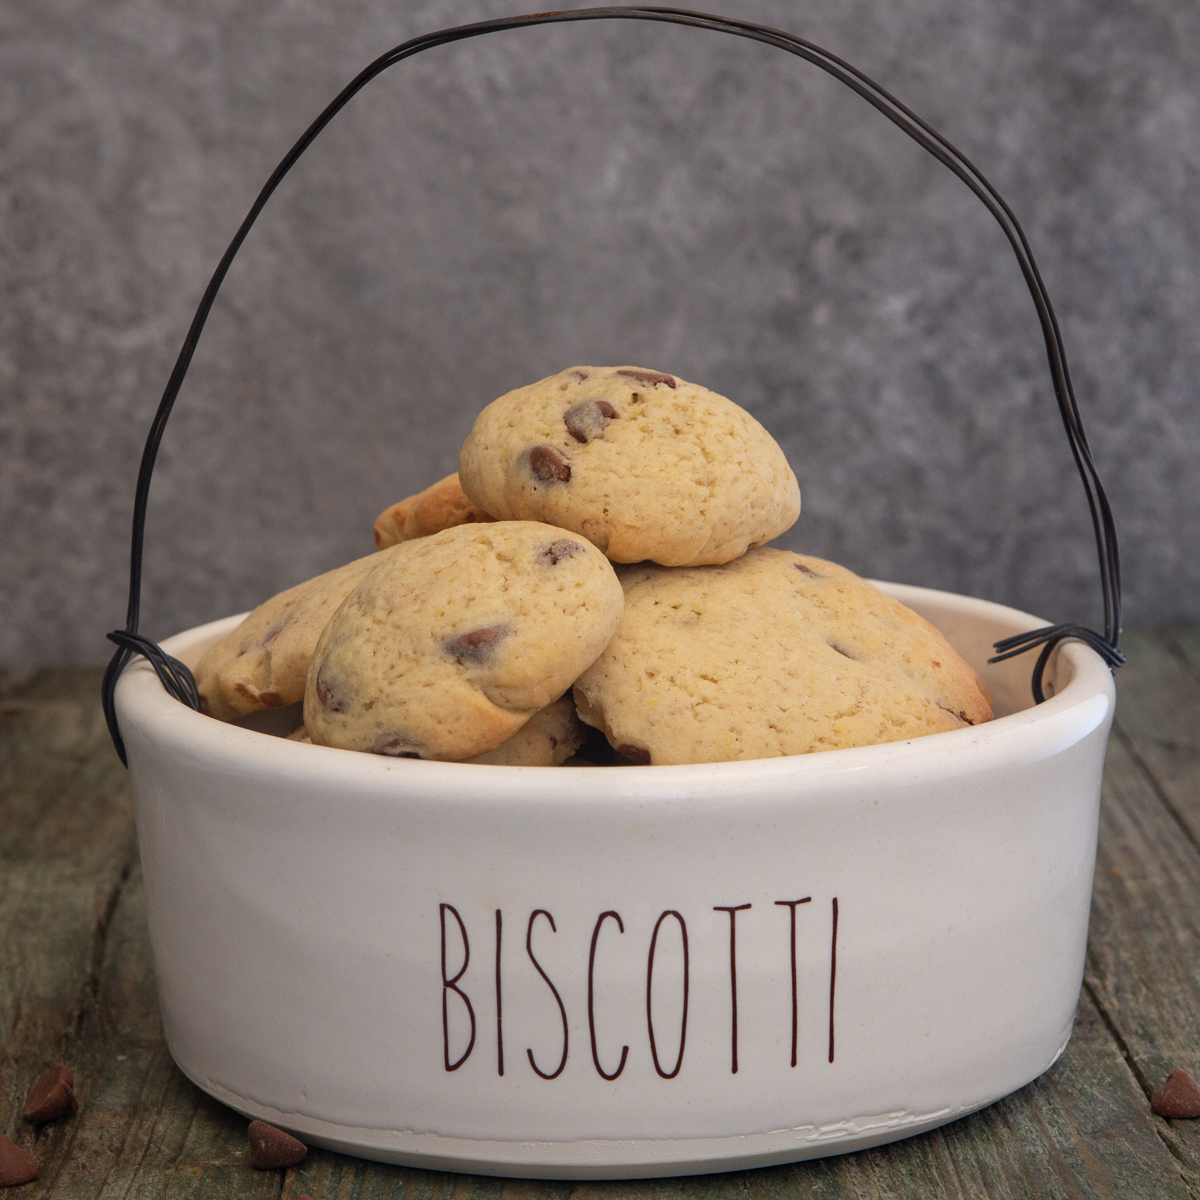 chocolate chip cookies in a white biscotti bowl.